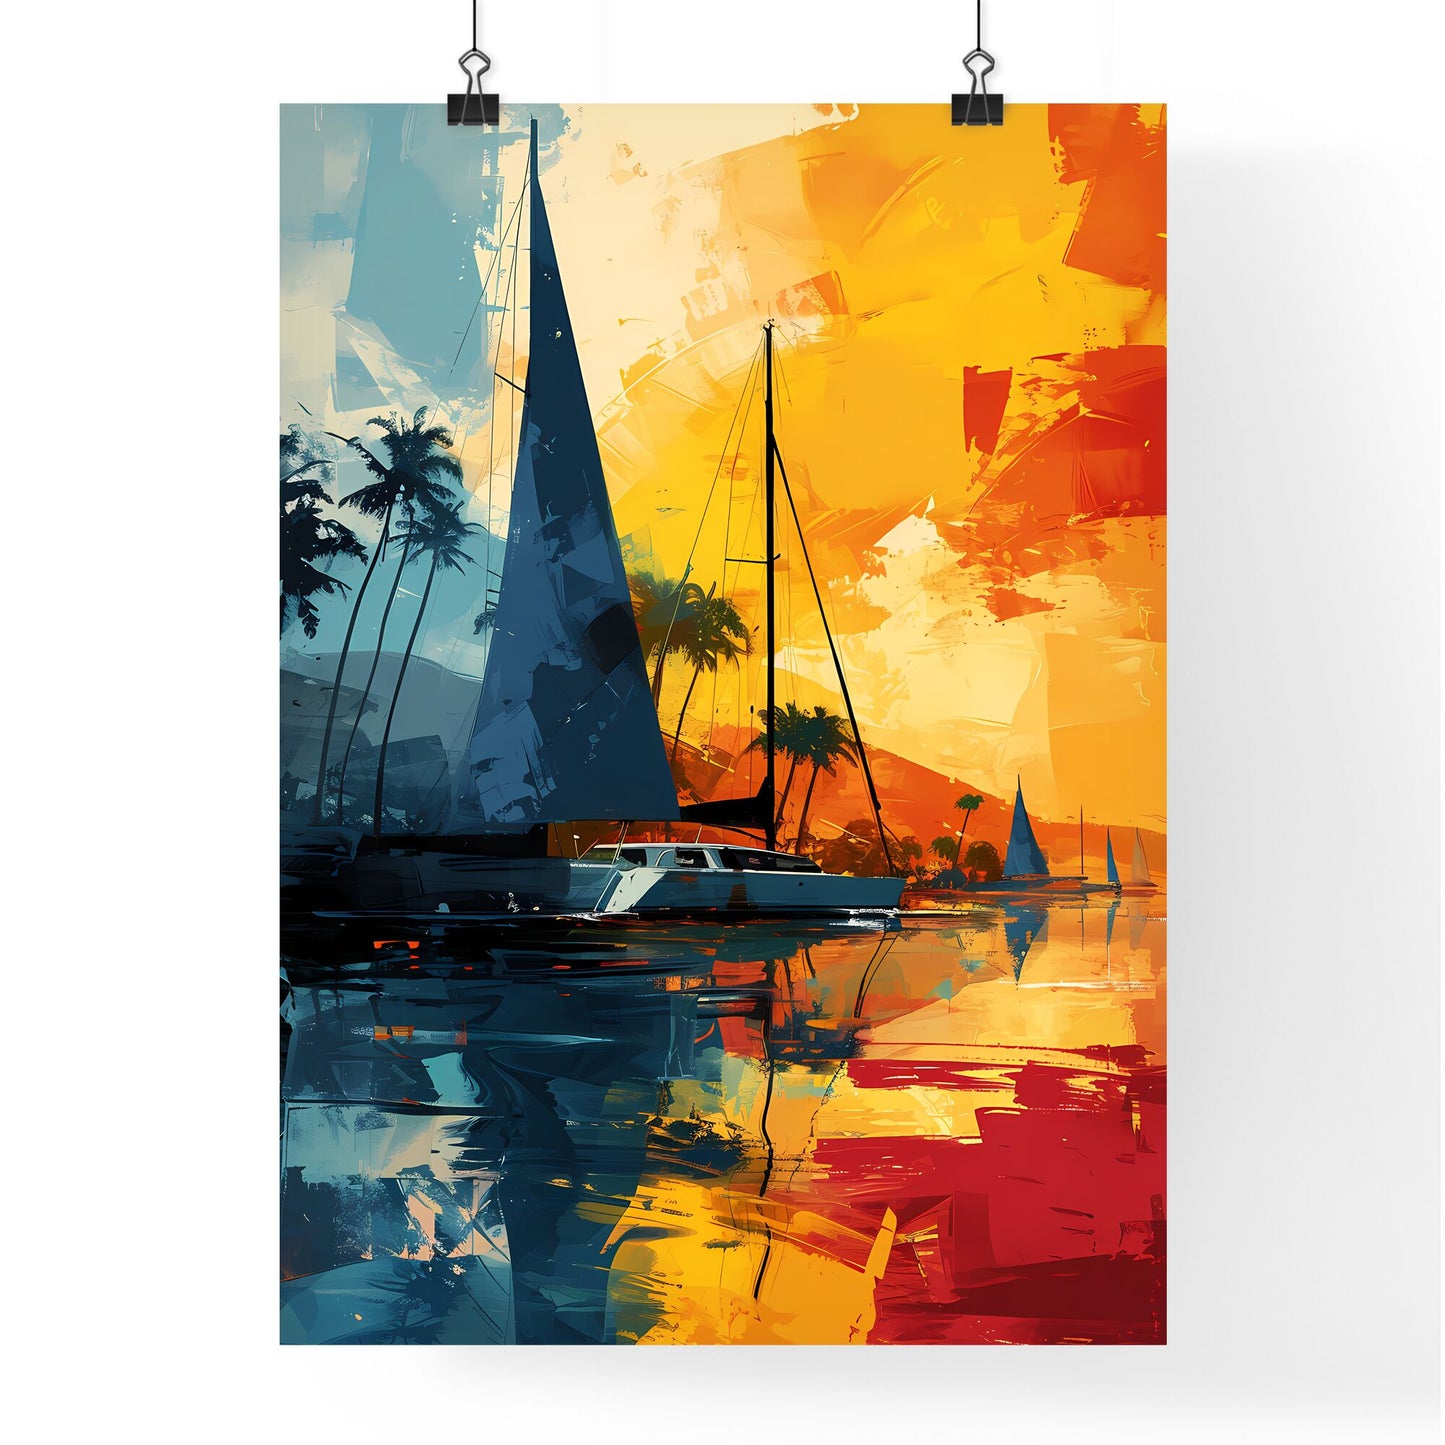 A Poster of abstract hand-made print - A Sailboat In The Water Default Title